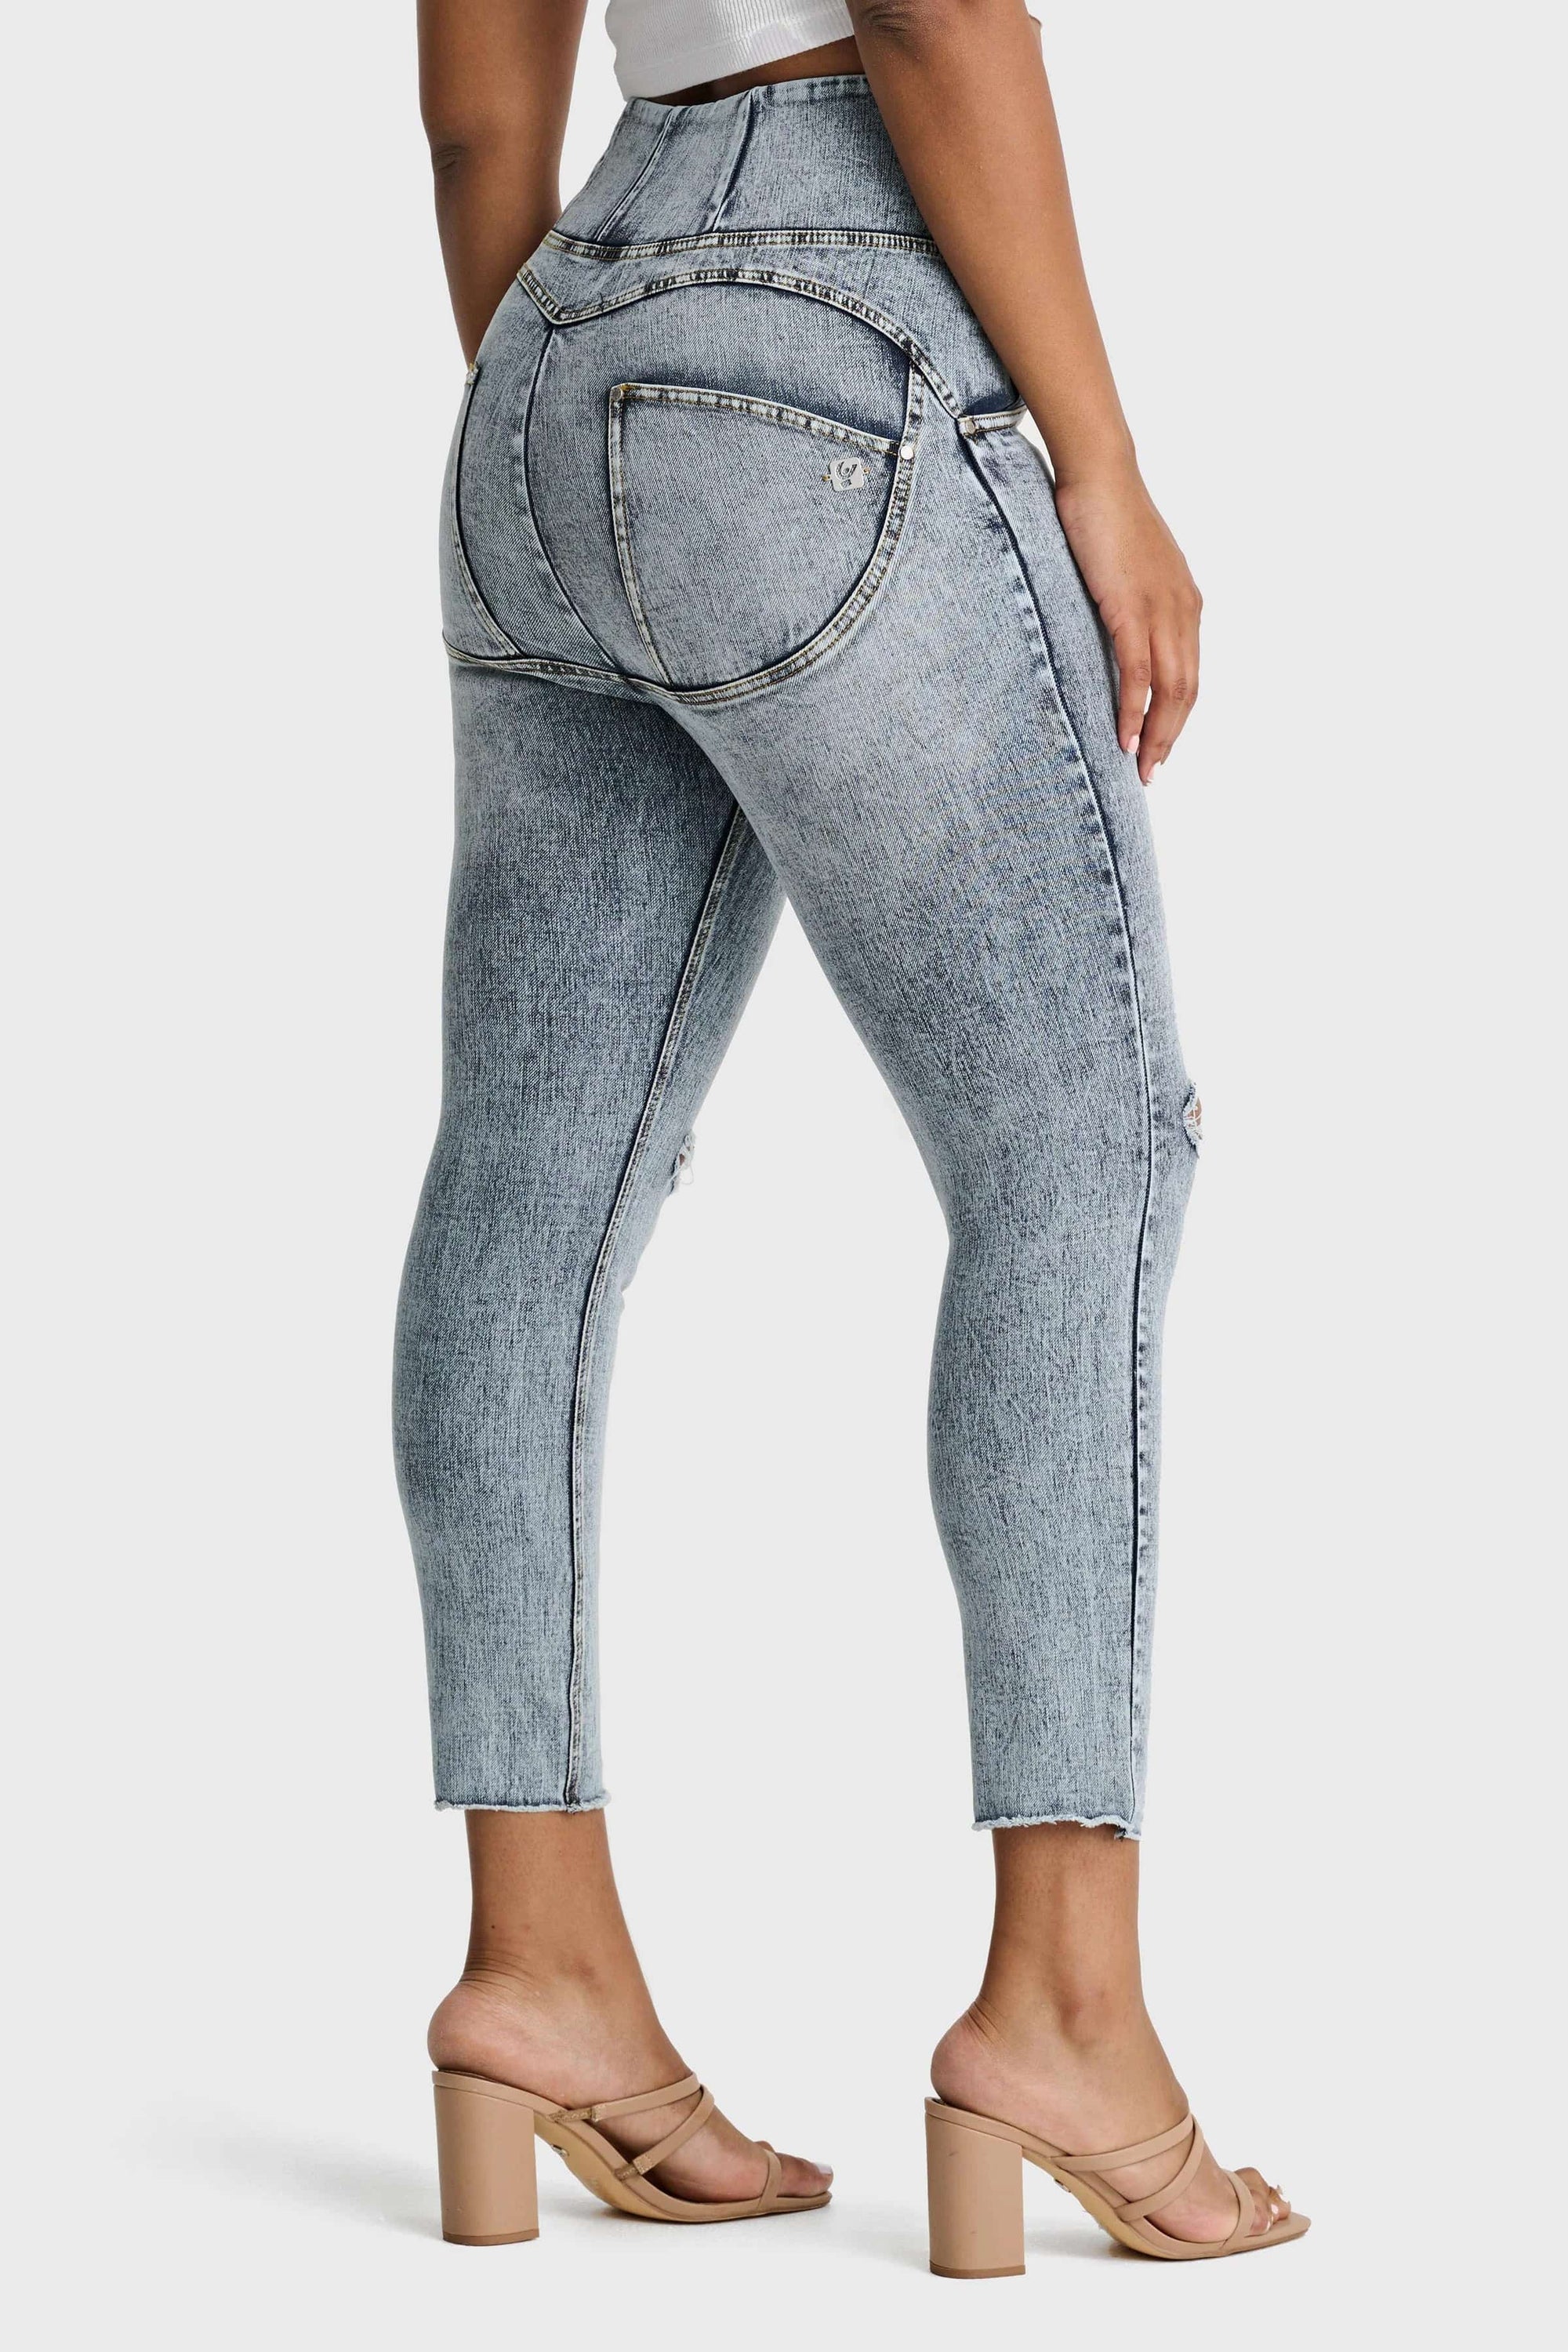 WR.UP® Snug Curvy Ripped Jeans - High Waisted - Petite Length - Blue Stonewash + Yellow Stitching 3